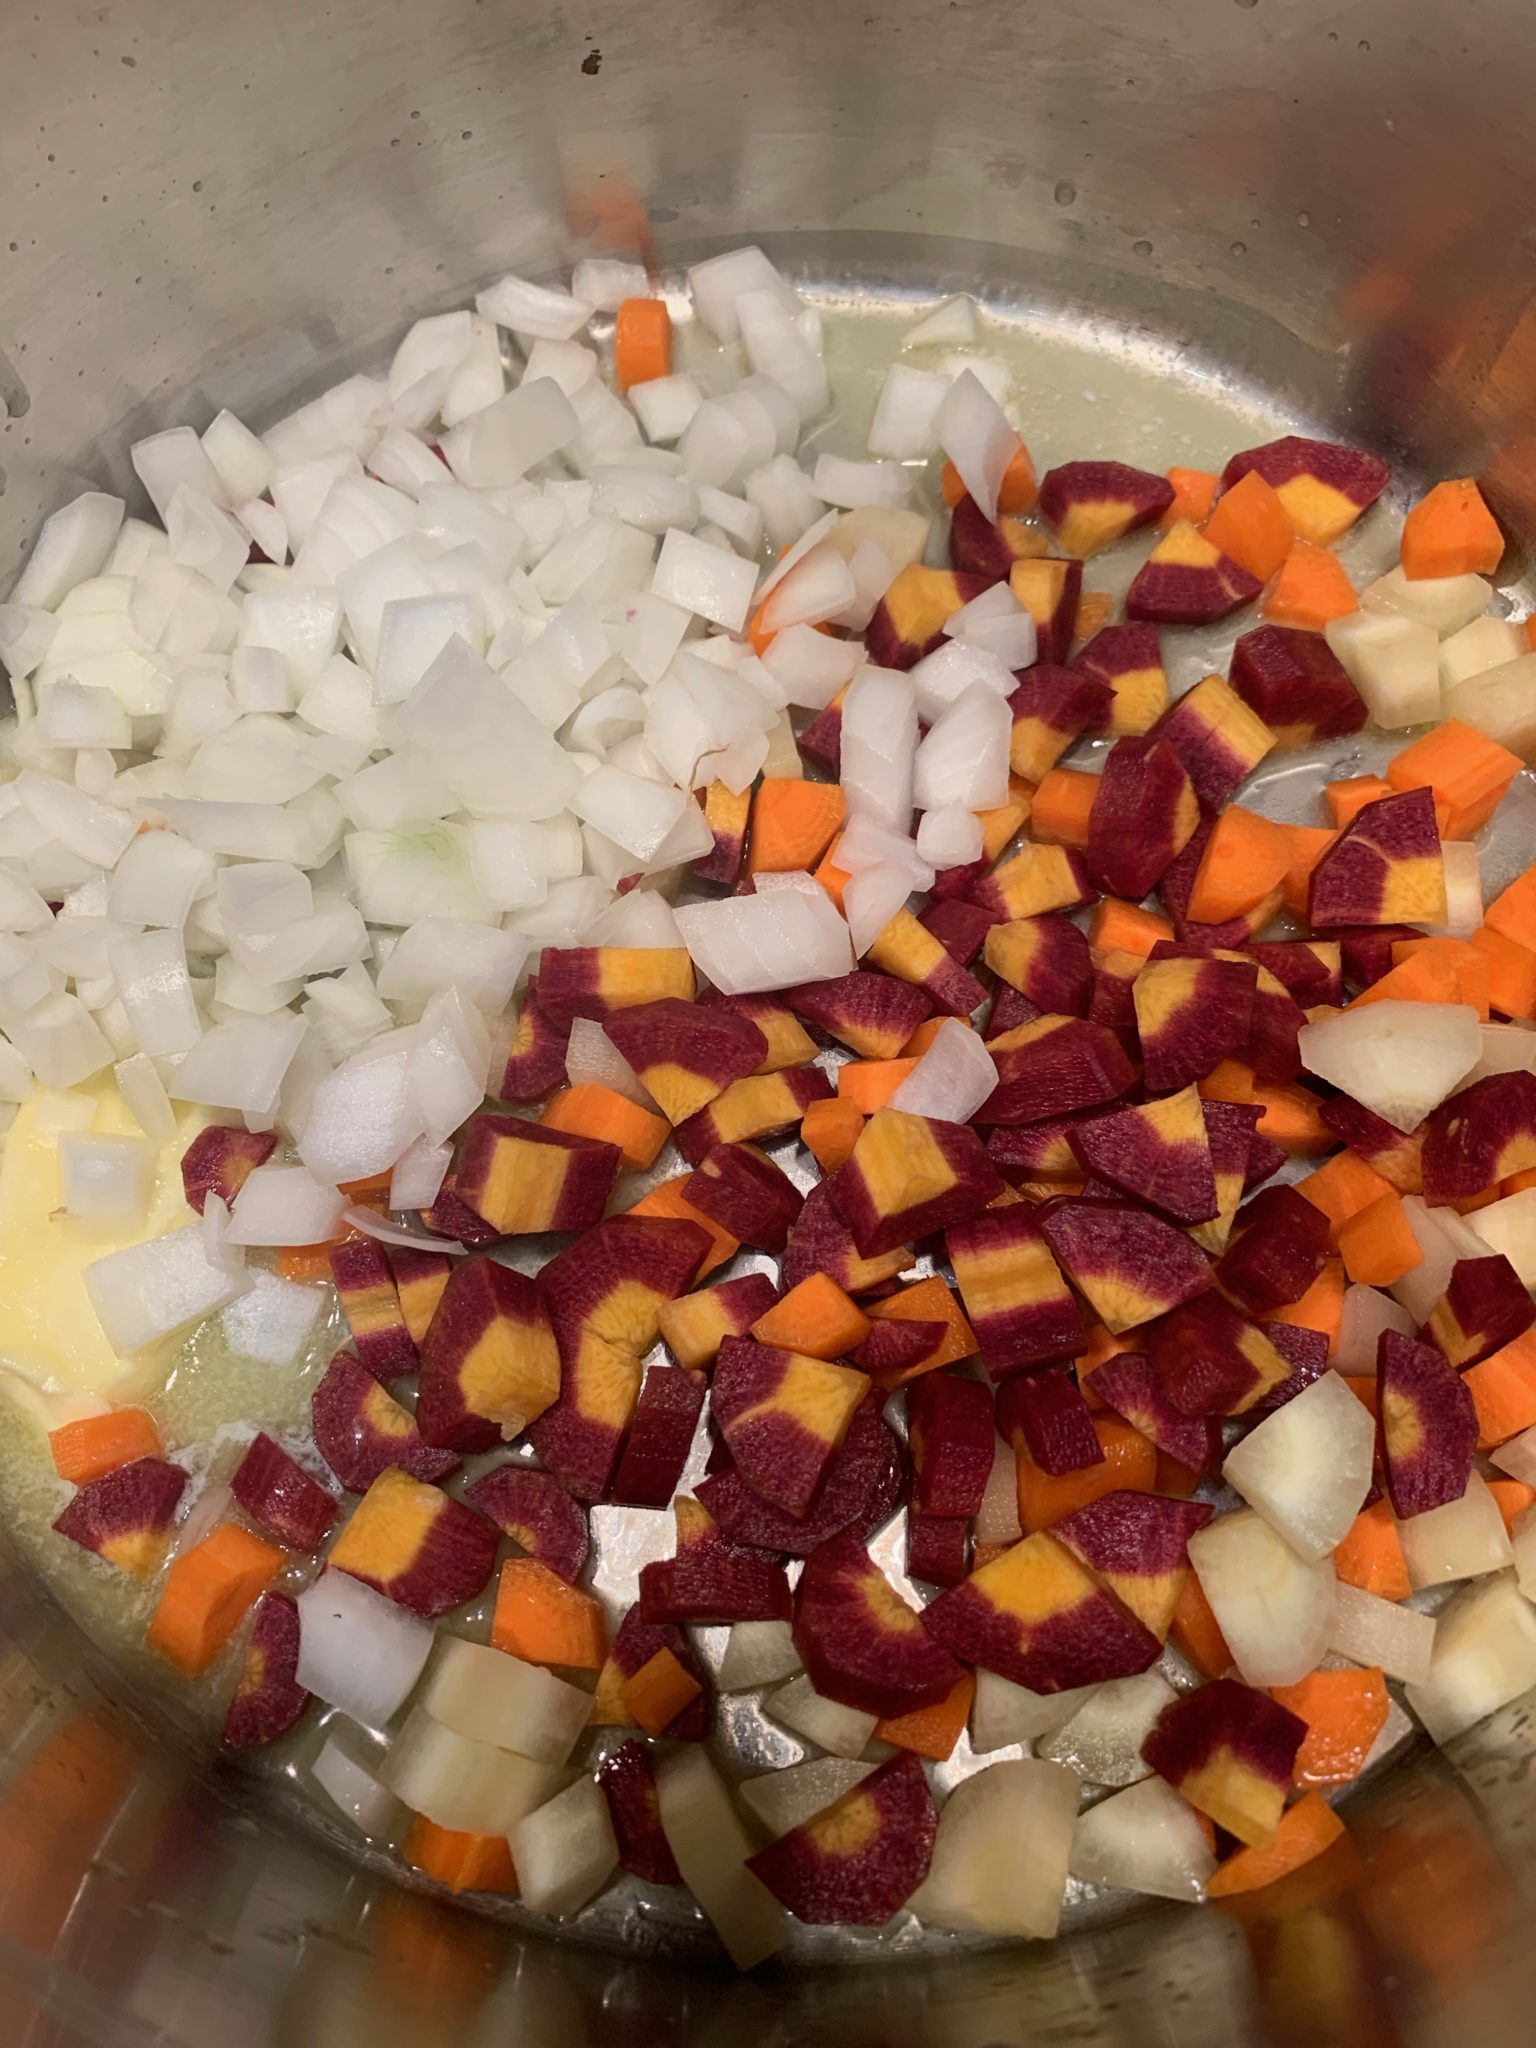 Showing carrots and onion cut to a similar size for cooking